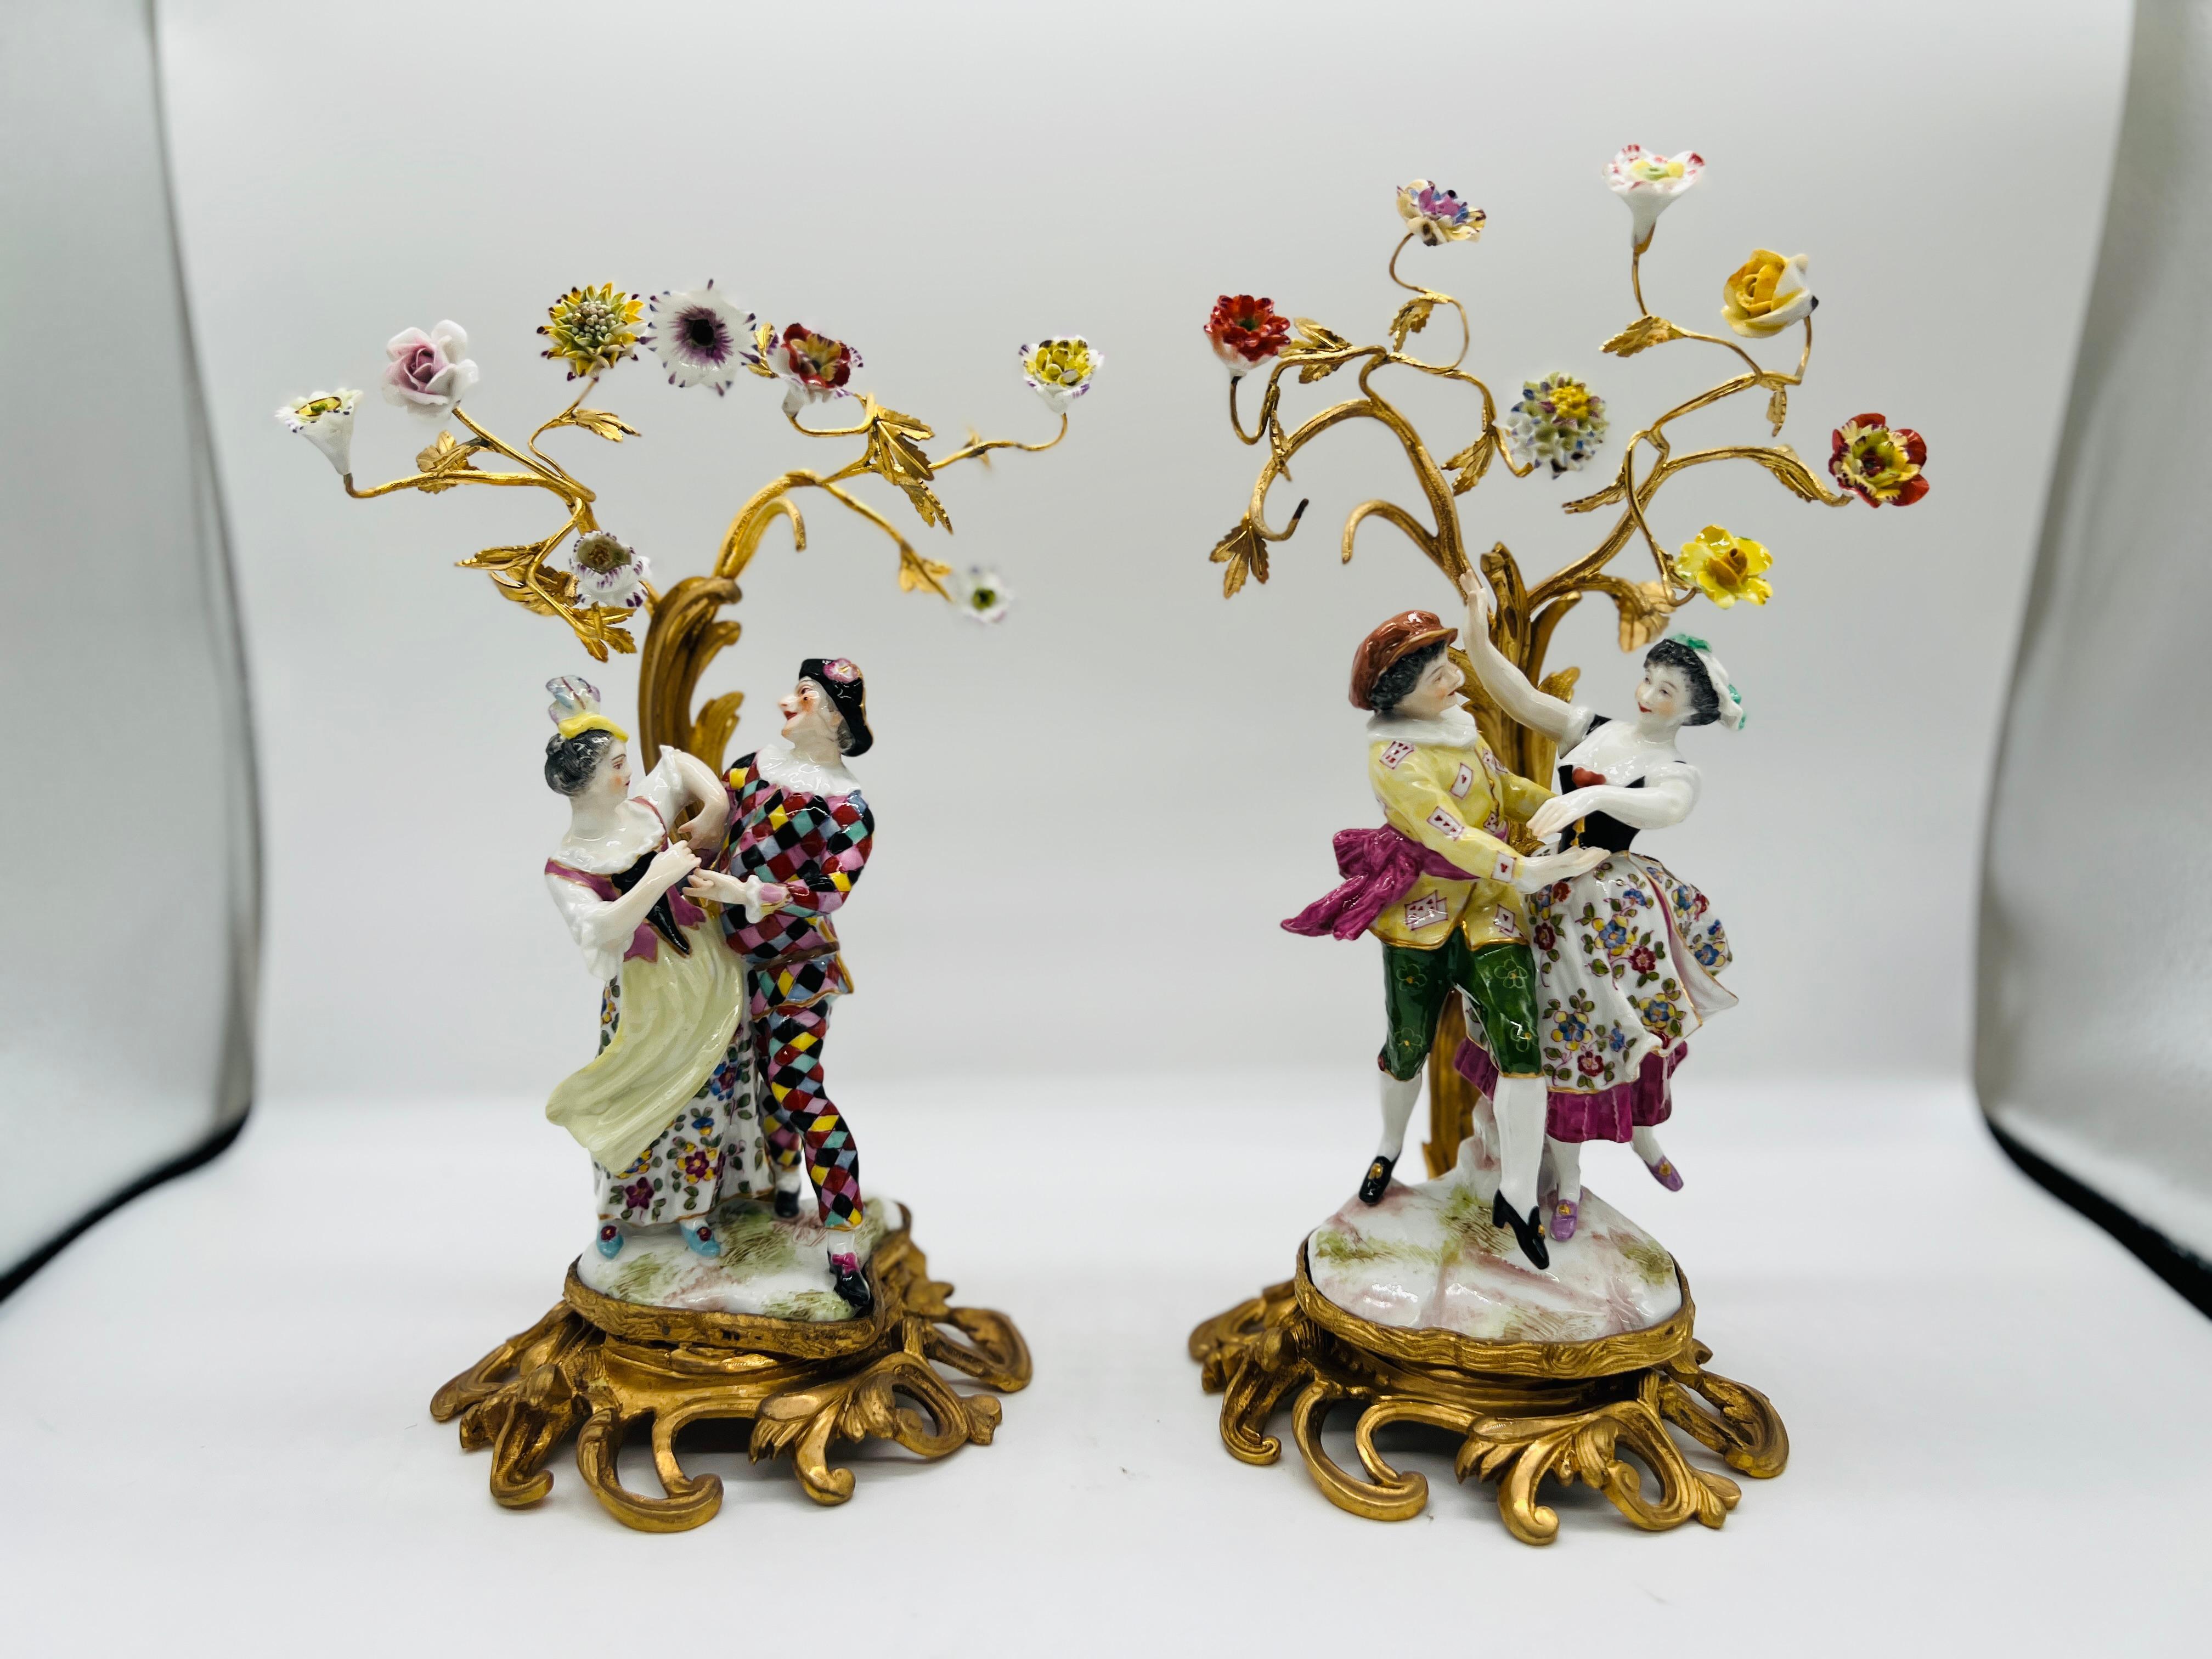 Samson, Edme Et Cie (Founded 1845), circa 1880. 

A very fine grouping of two porcelain displays:

1) Depicting Harlequin couple dancing after the original Meissen 